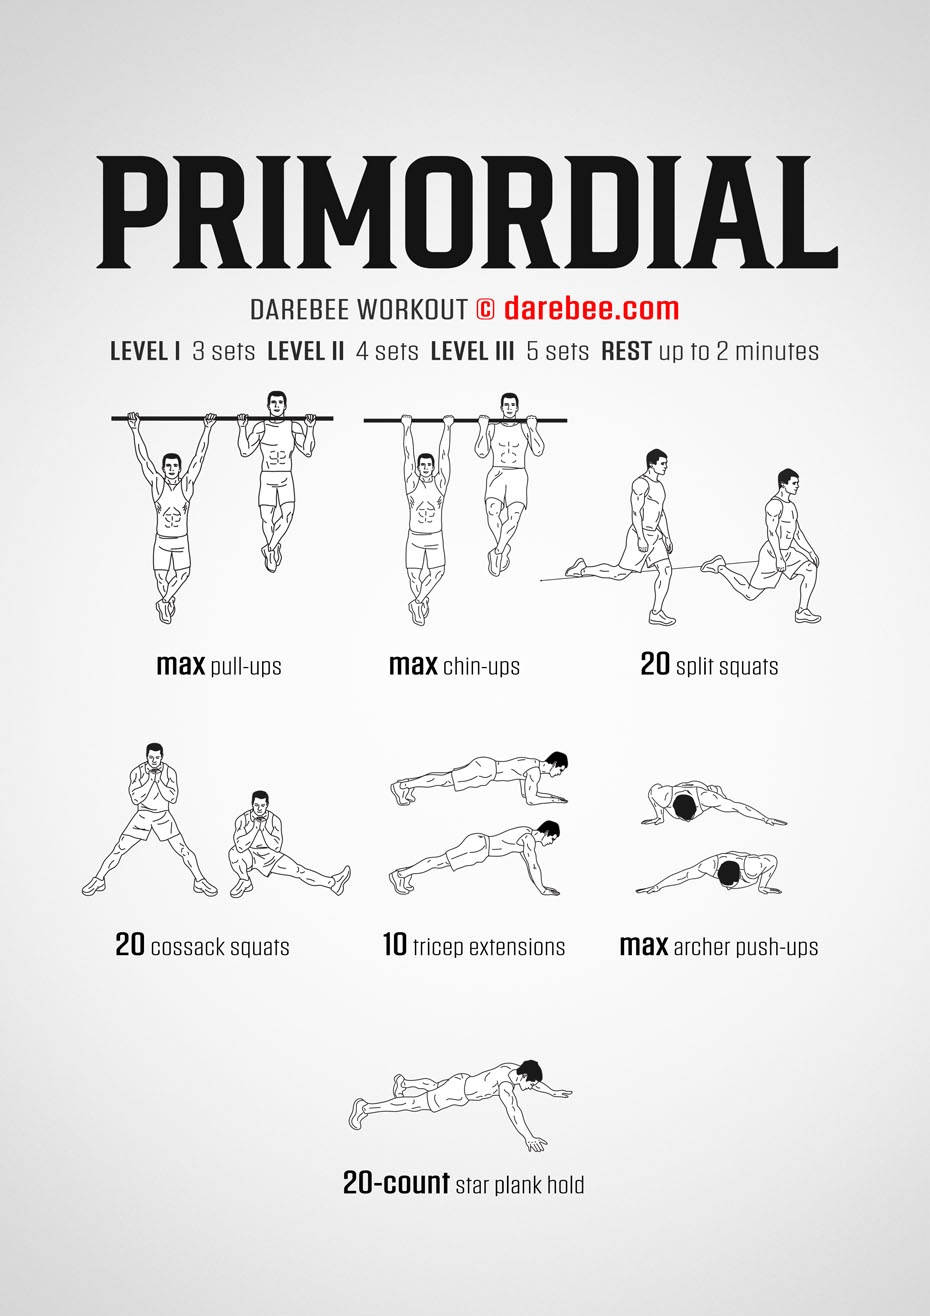 Primordial is a DAREBEE advanced home fitness workout that helps you develop total body strength in he comfort of your own home.